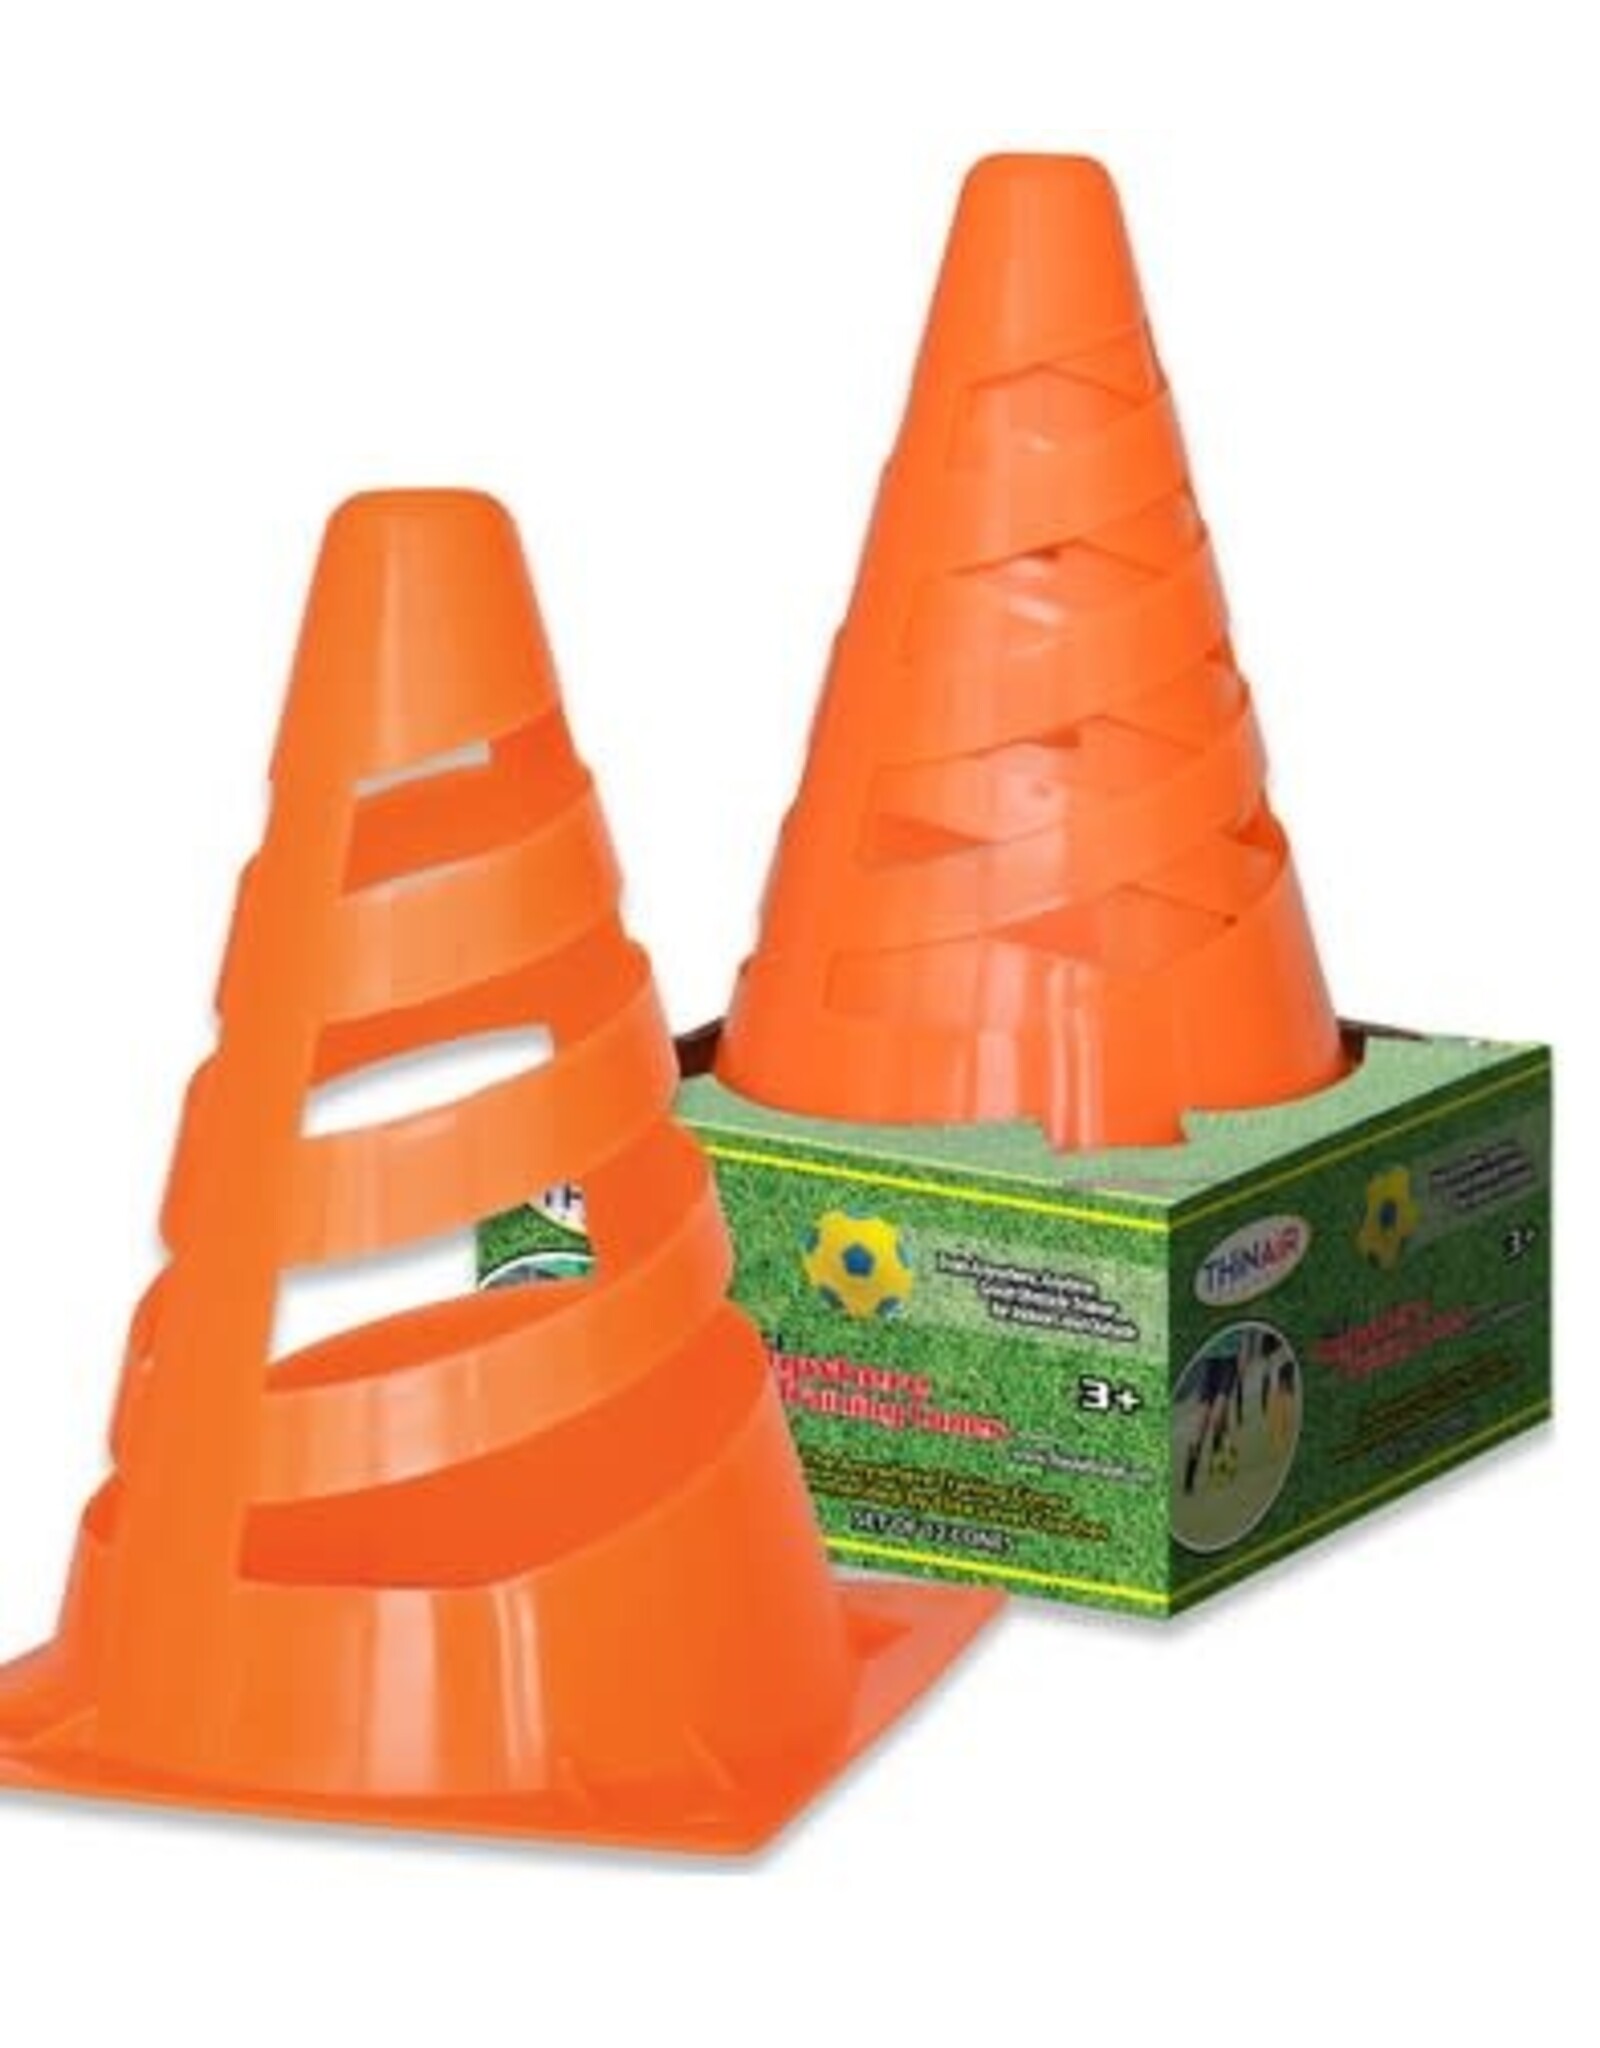 3 Hares Games The Anywhere Training Cones